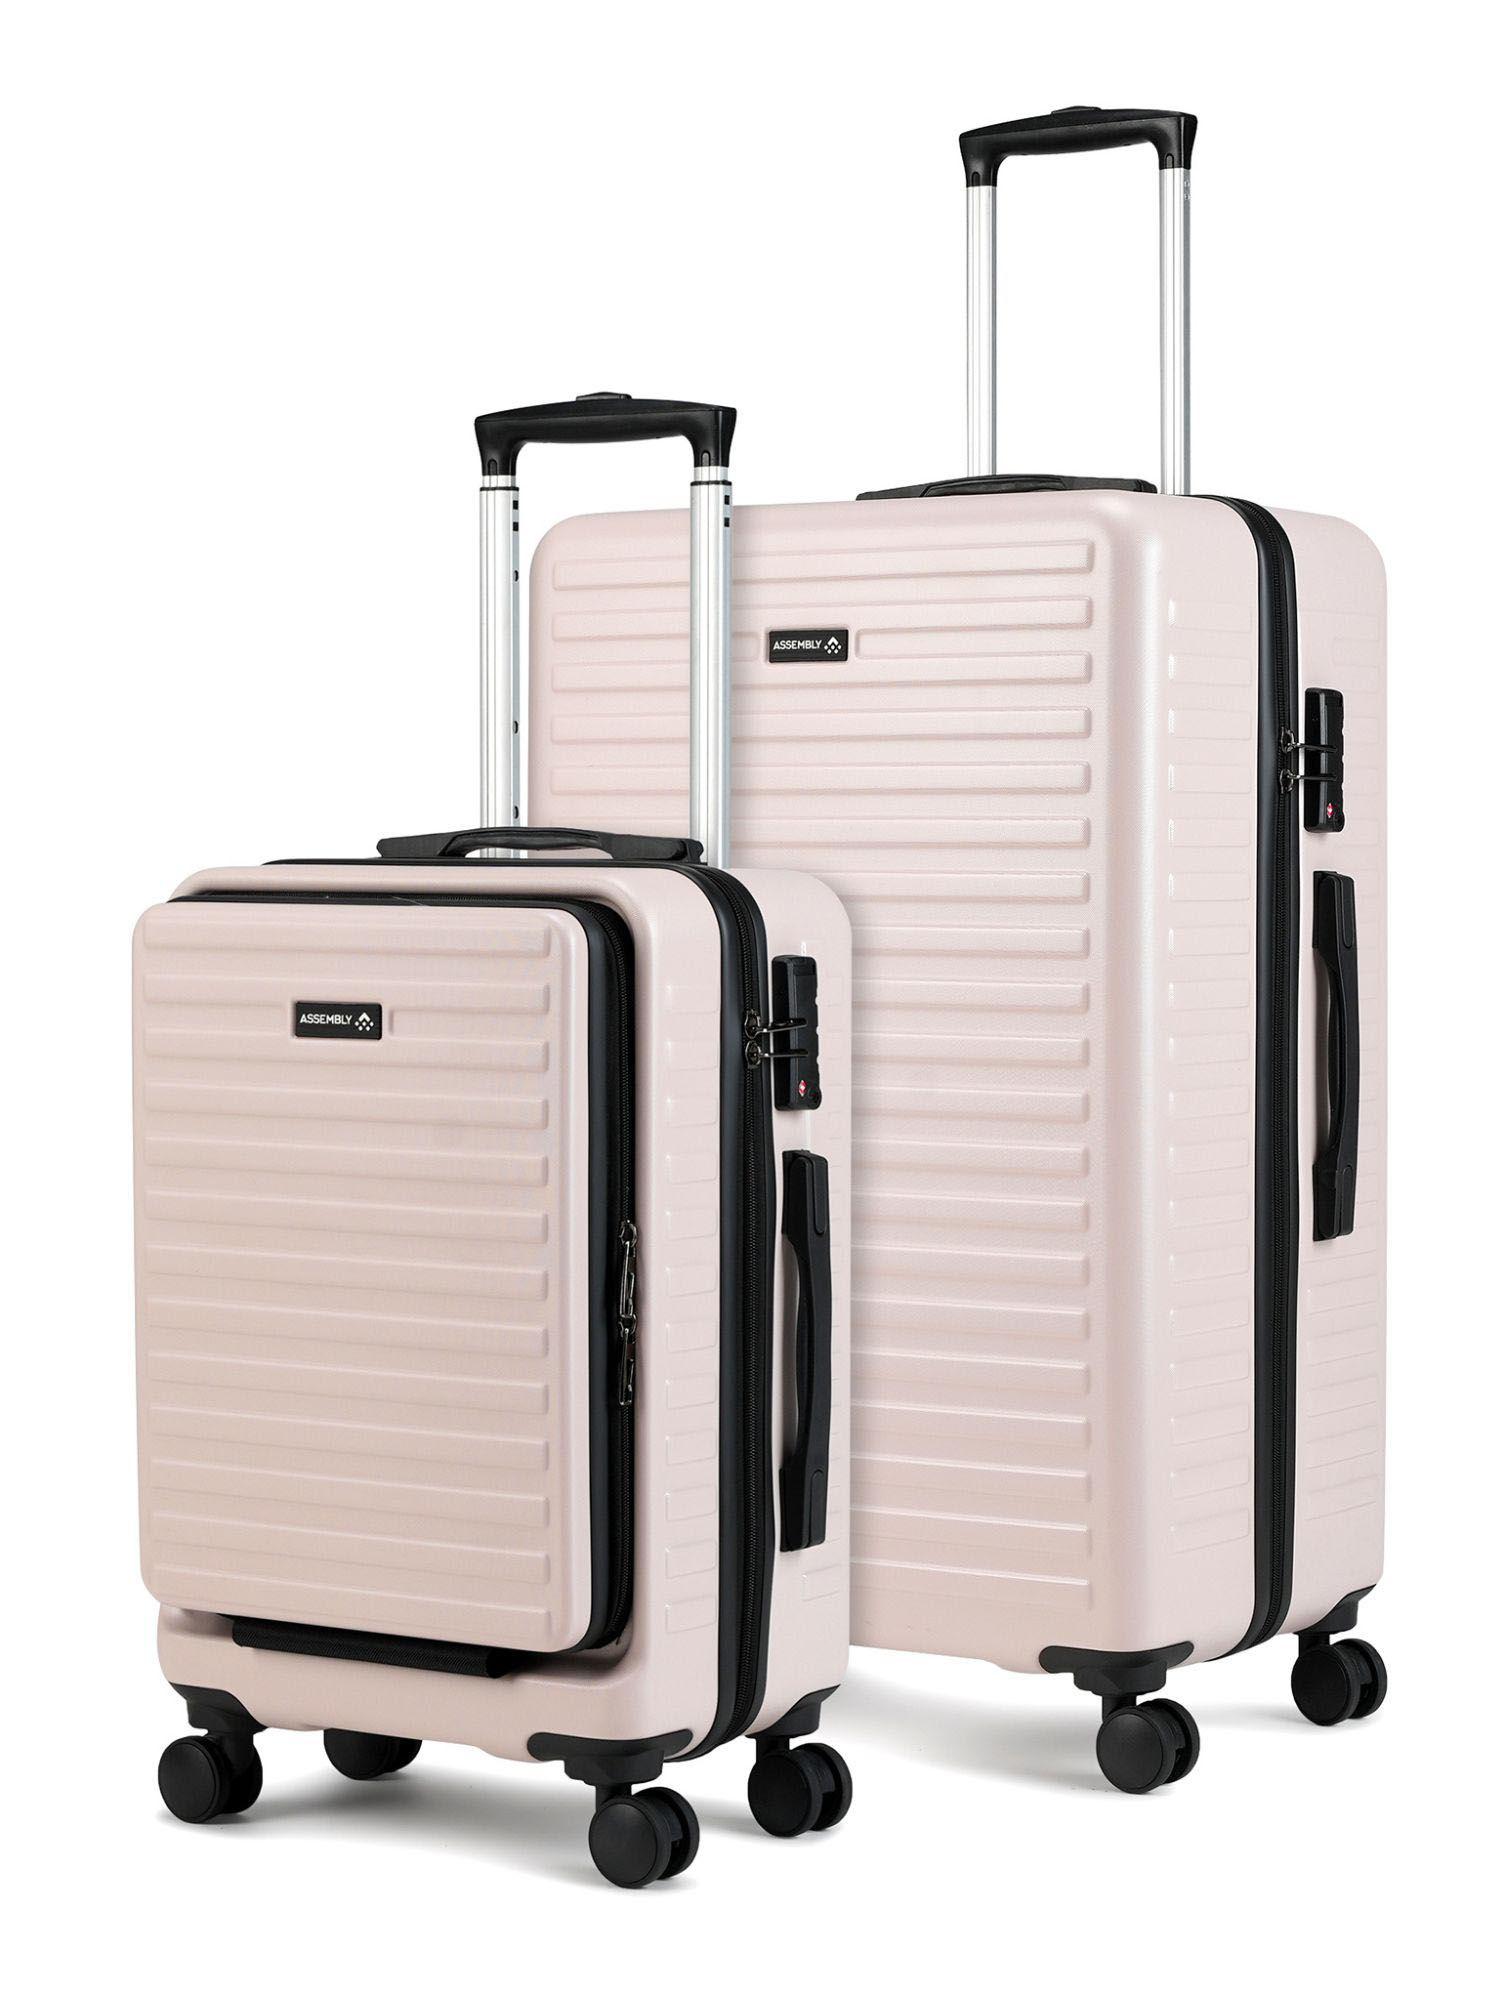 hard luggage set of 2 cabin trolley & large check-in desert ivory